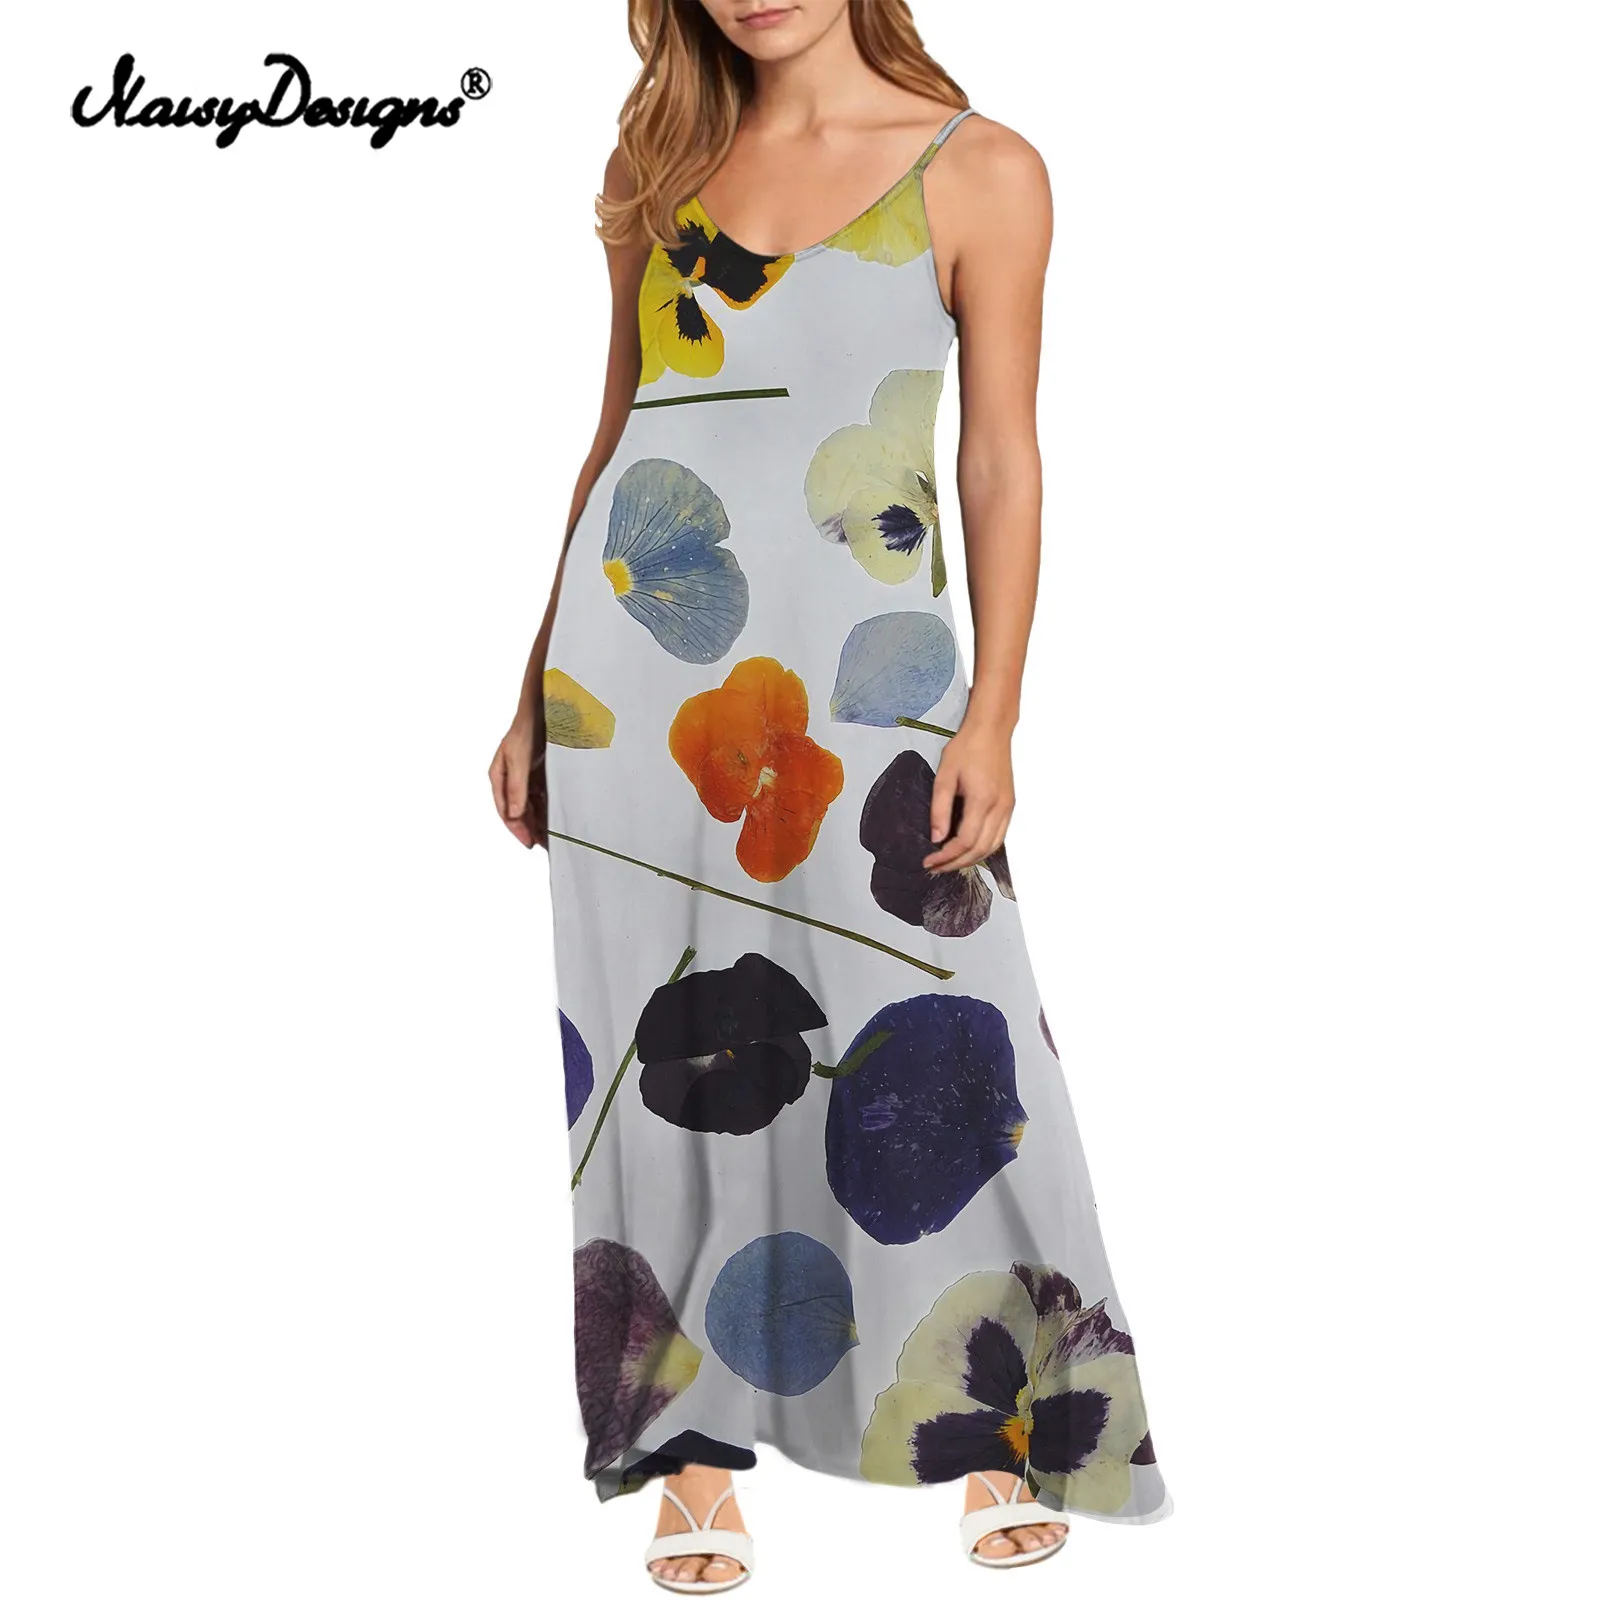 Noisydesigns Summer Fashion Versatile Women's New Sling Sleeveless Color Pansy Flowers Printed Dresses for Women Dropshipping